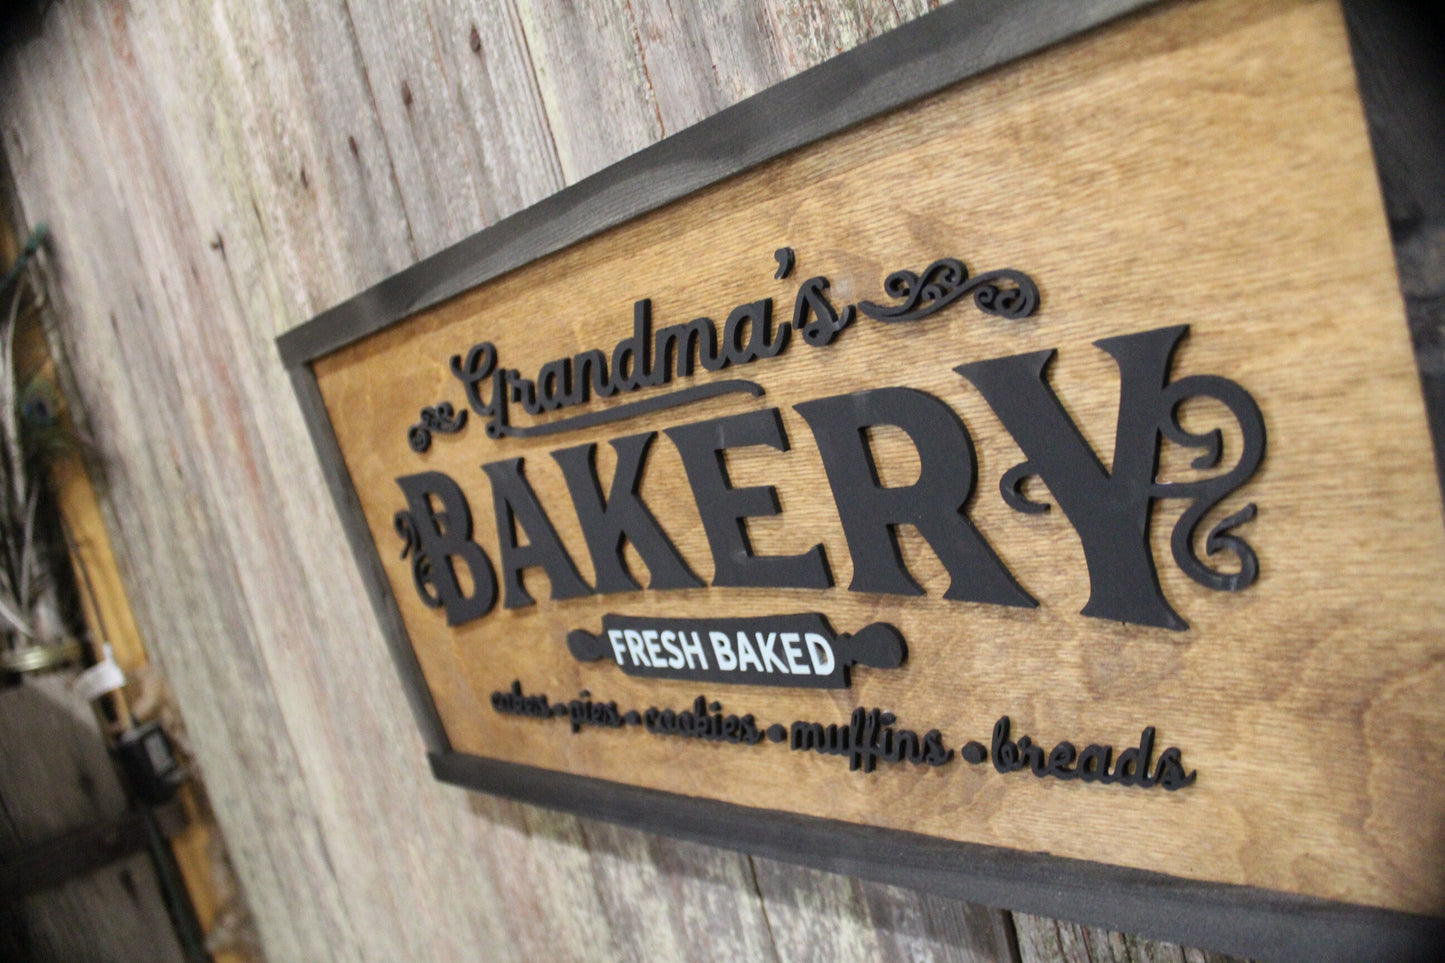 Grandmas Bakery Kitchen Wood Sign 3D Raised Text Fresh Baked Pies Cakes Cookies Mothers Day Gift Granny Handmade Rustic Primitive